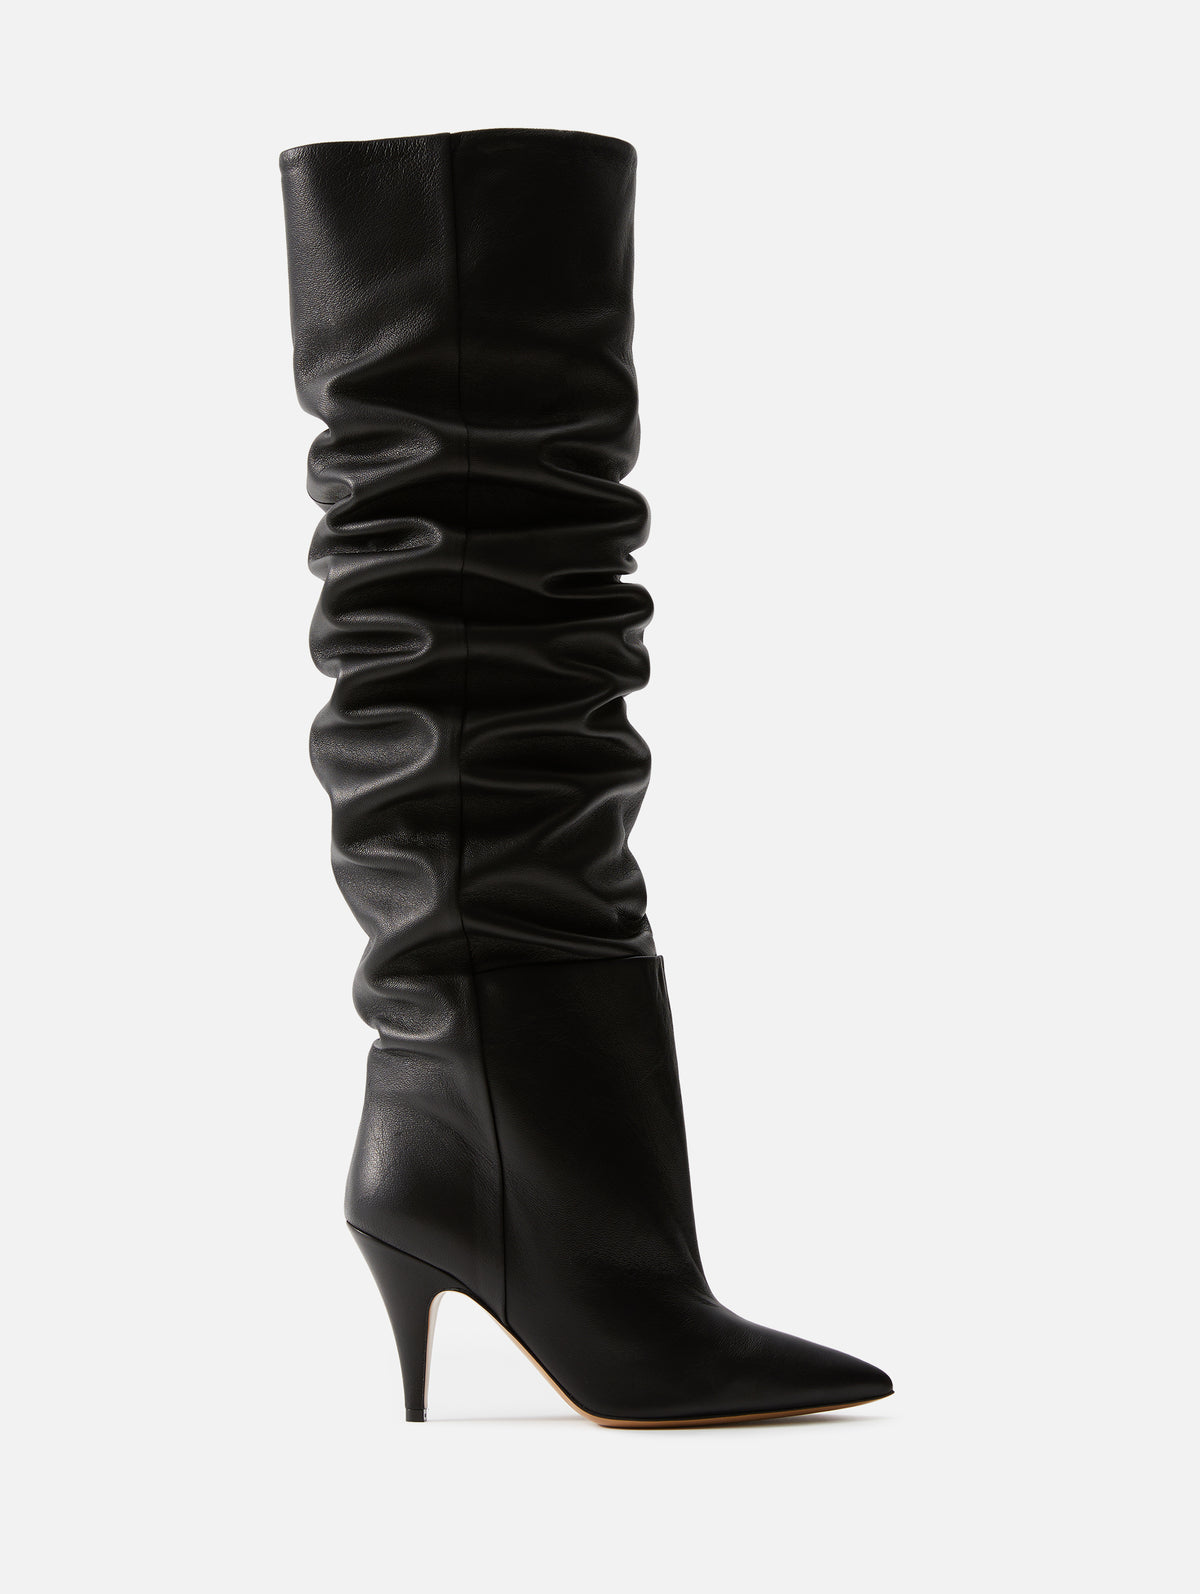 view 1 - River Knee High Boot 90mm